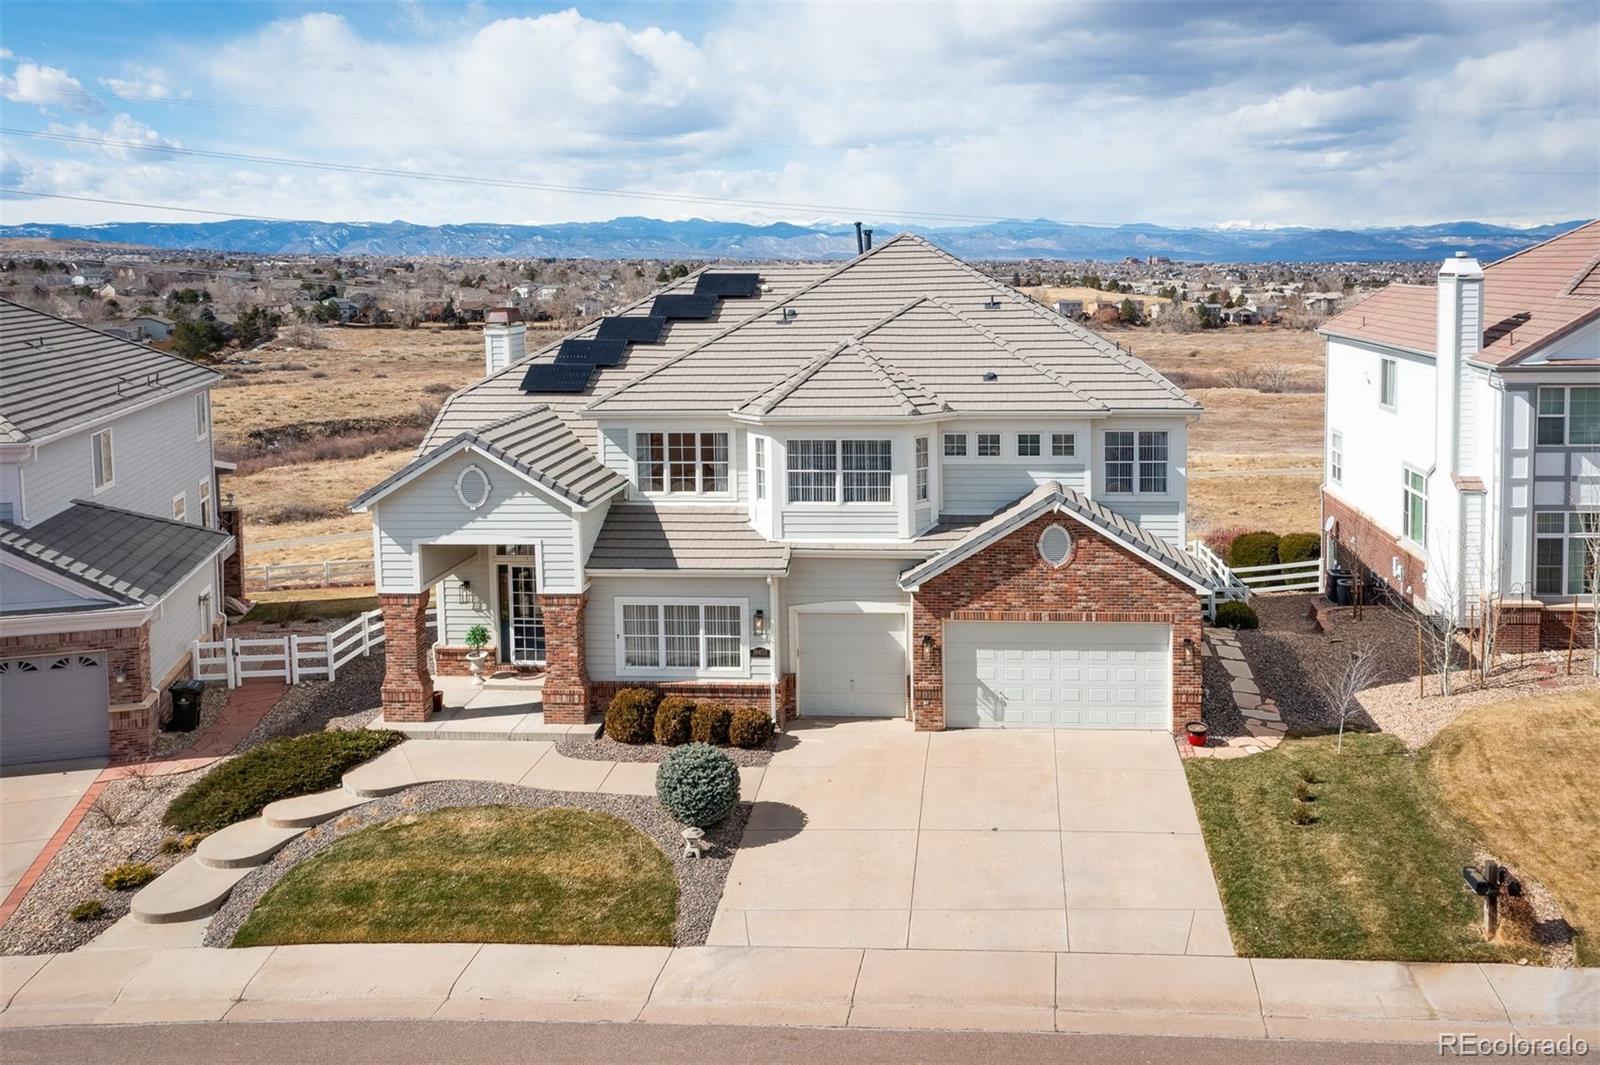 10453  Dunsford Drive, lone tree MLS: 3730844 Beds: 4 Baths: 4 Price: $1,475,000